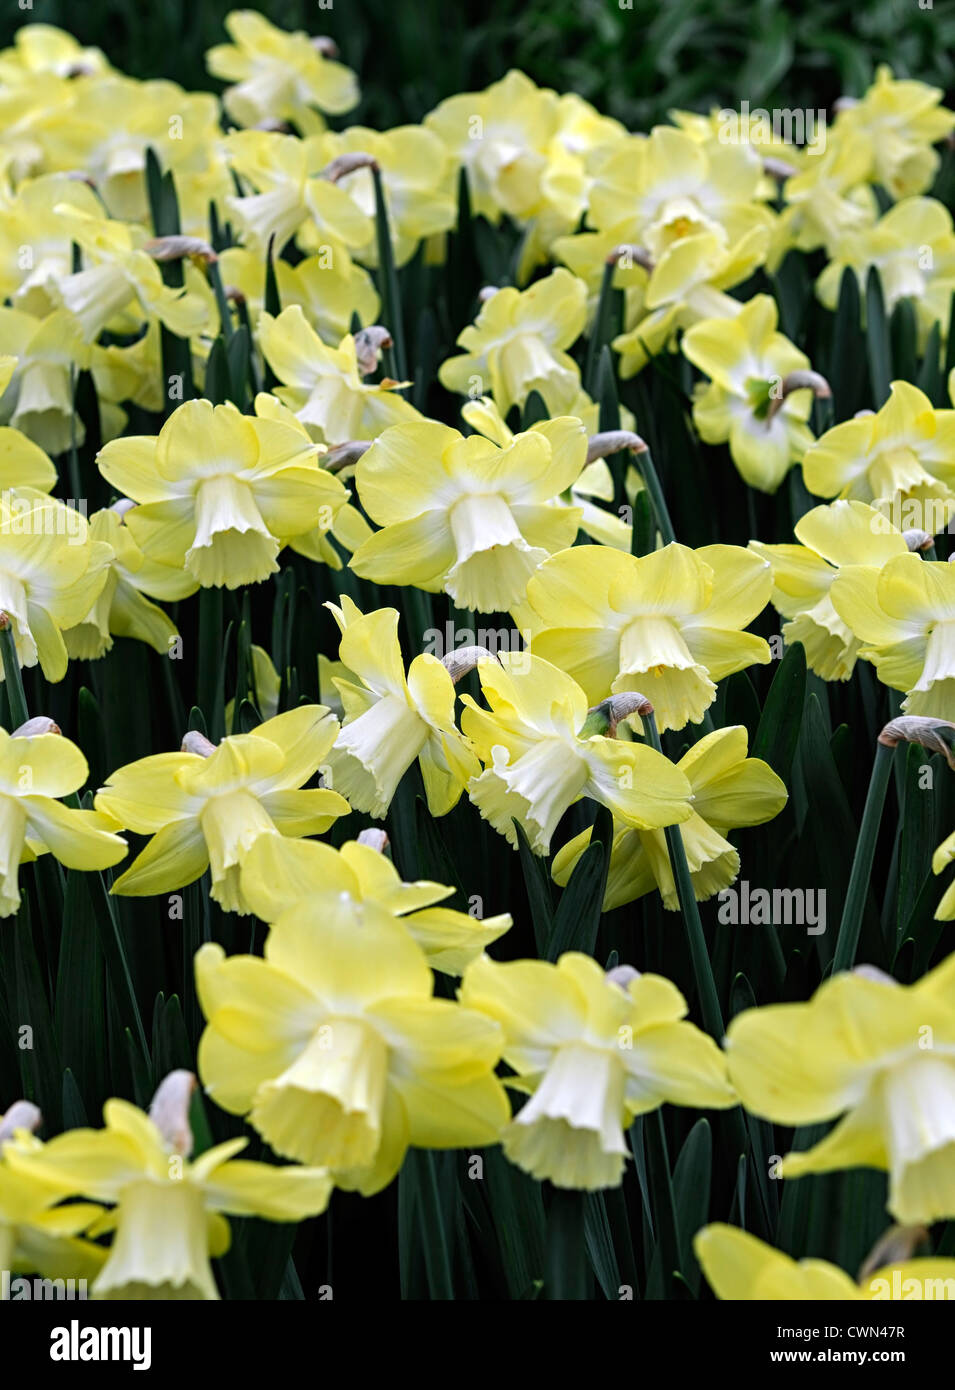 Narcissus avalon daffodil large cup cupped flowers drift bed spring bulb            flowering bloom blossom pale yellow Stock Photo